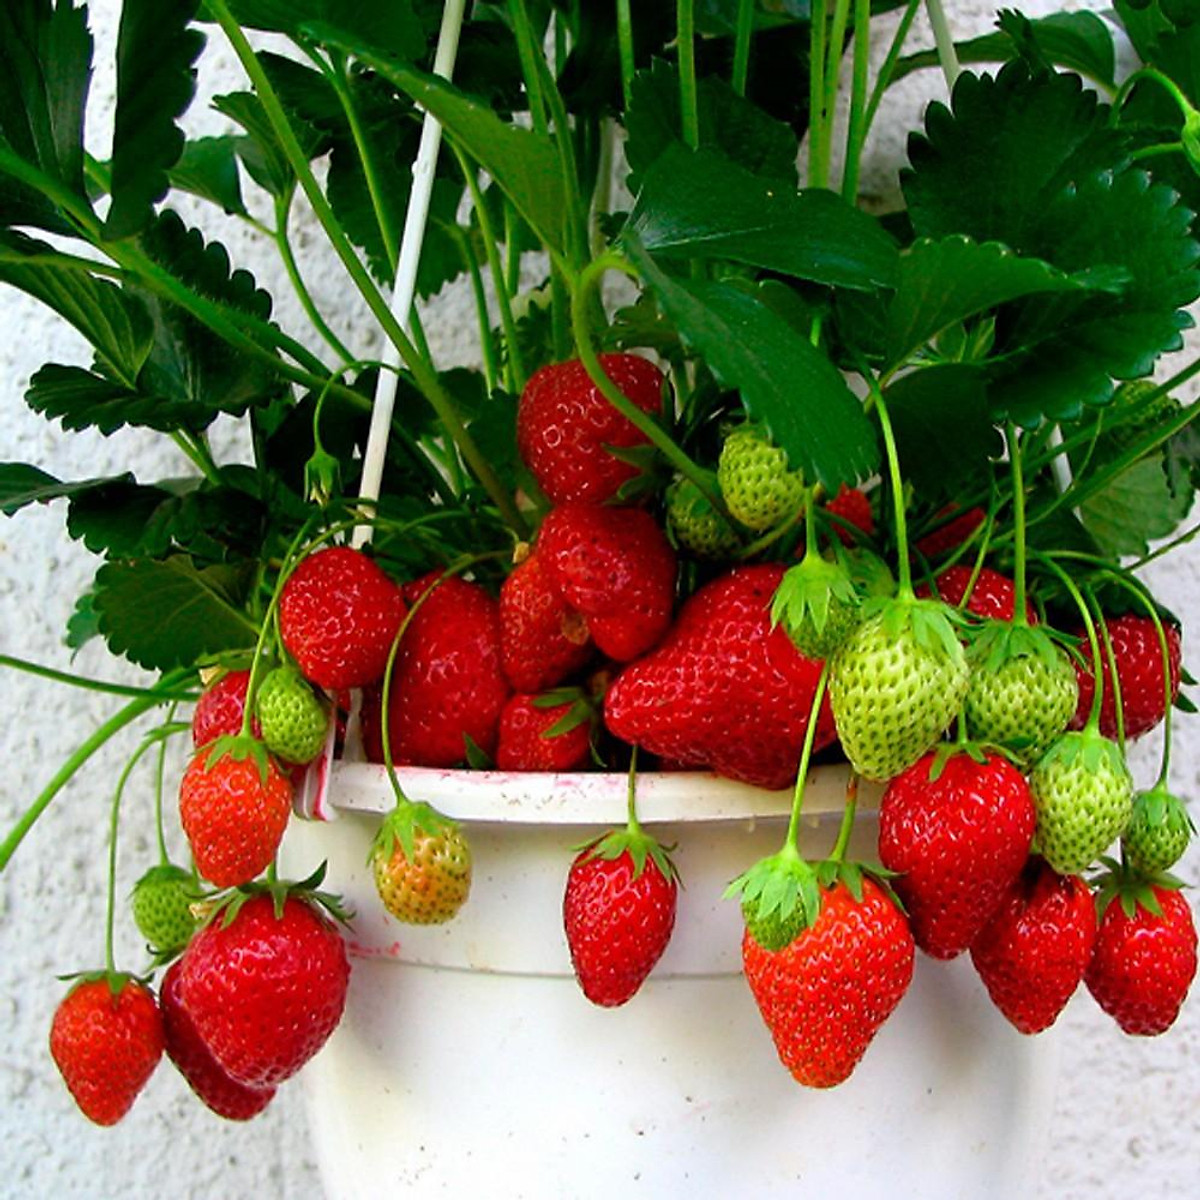 999+ Stunning 4K Strawberry Plant Images – Ultimate Collection of Strawberry Plant Pictures